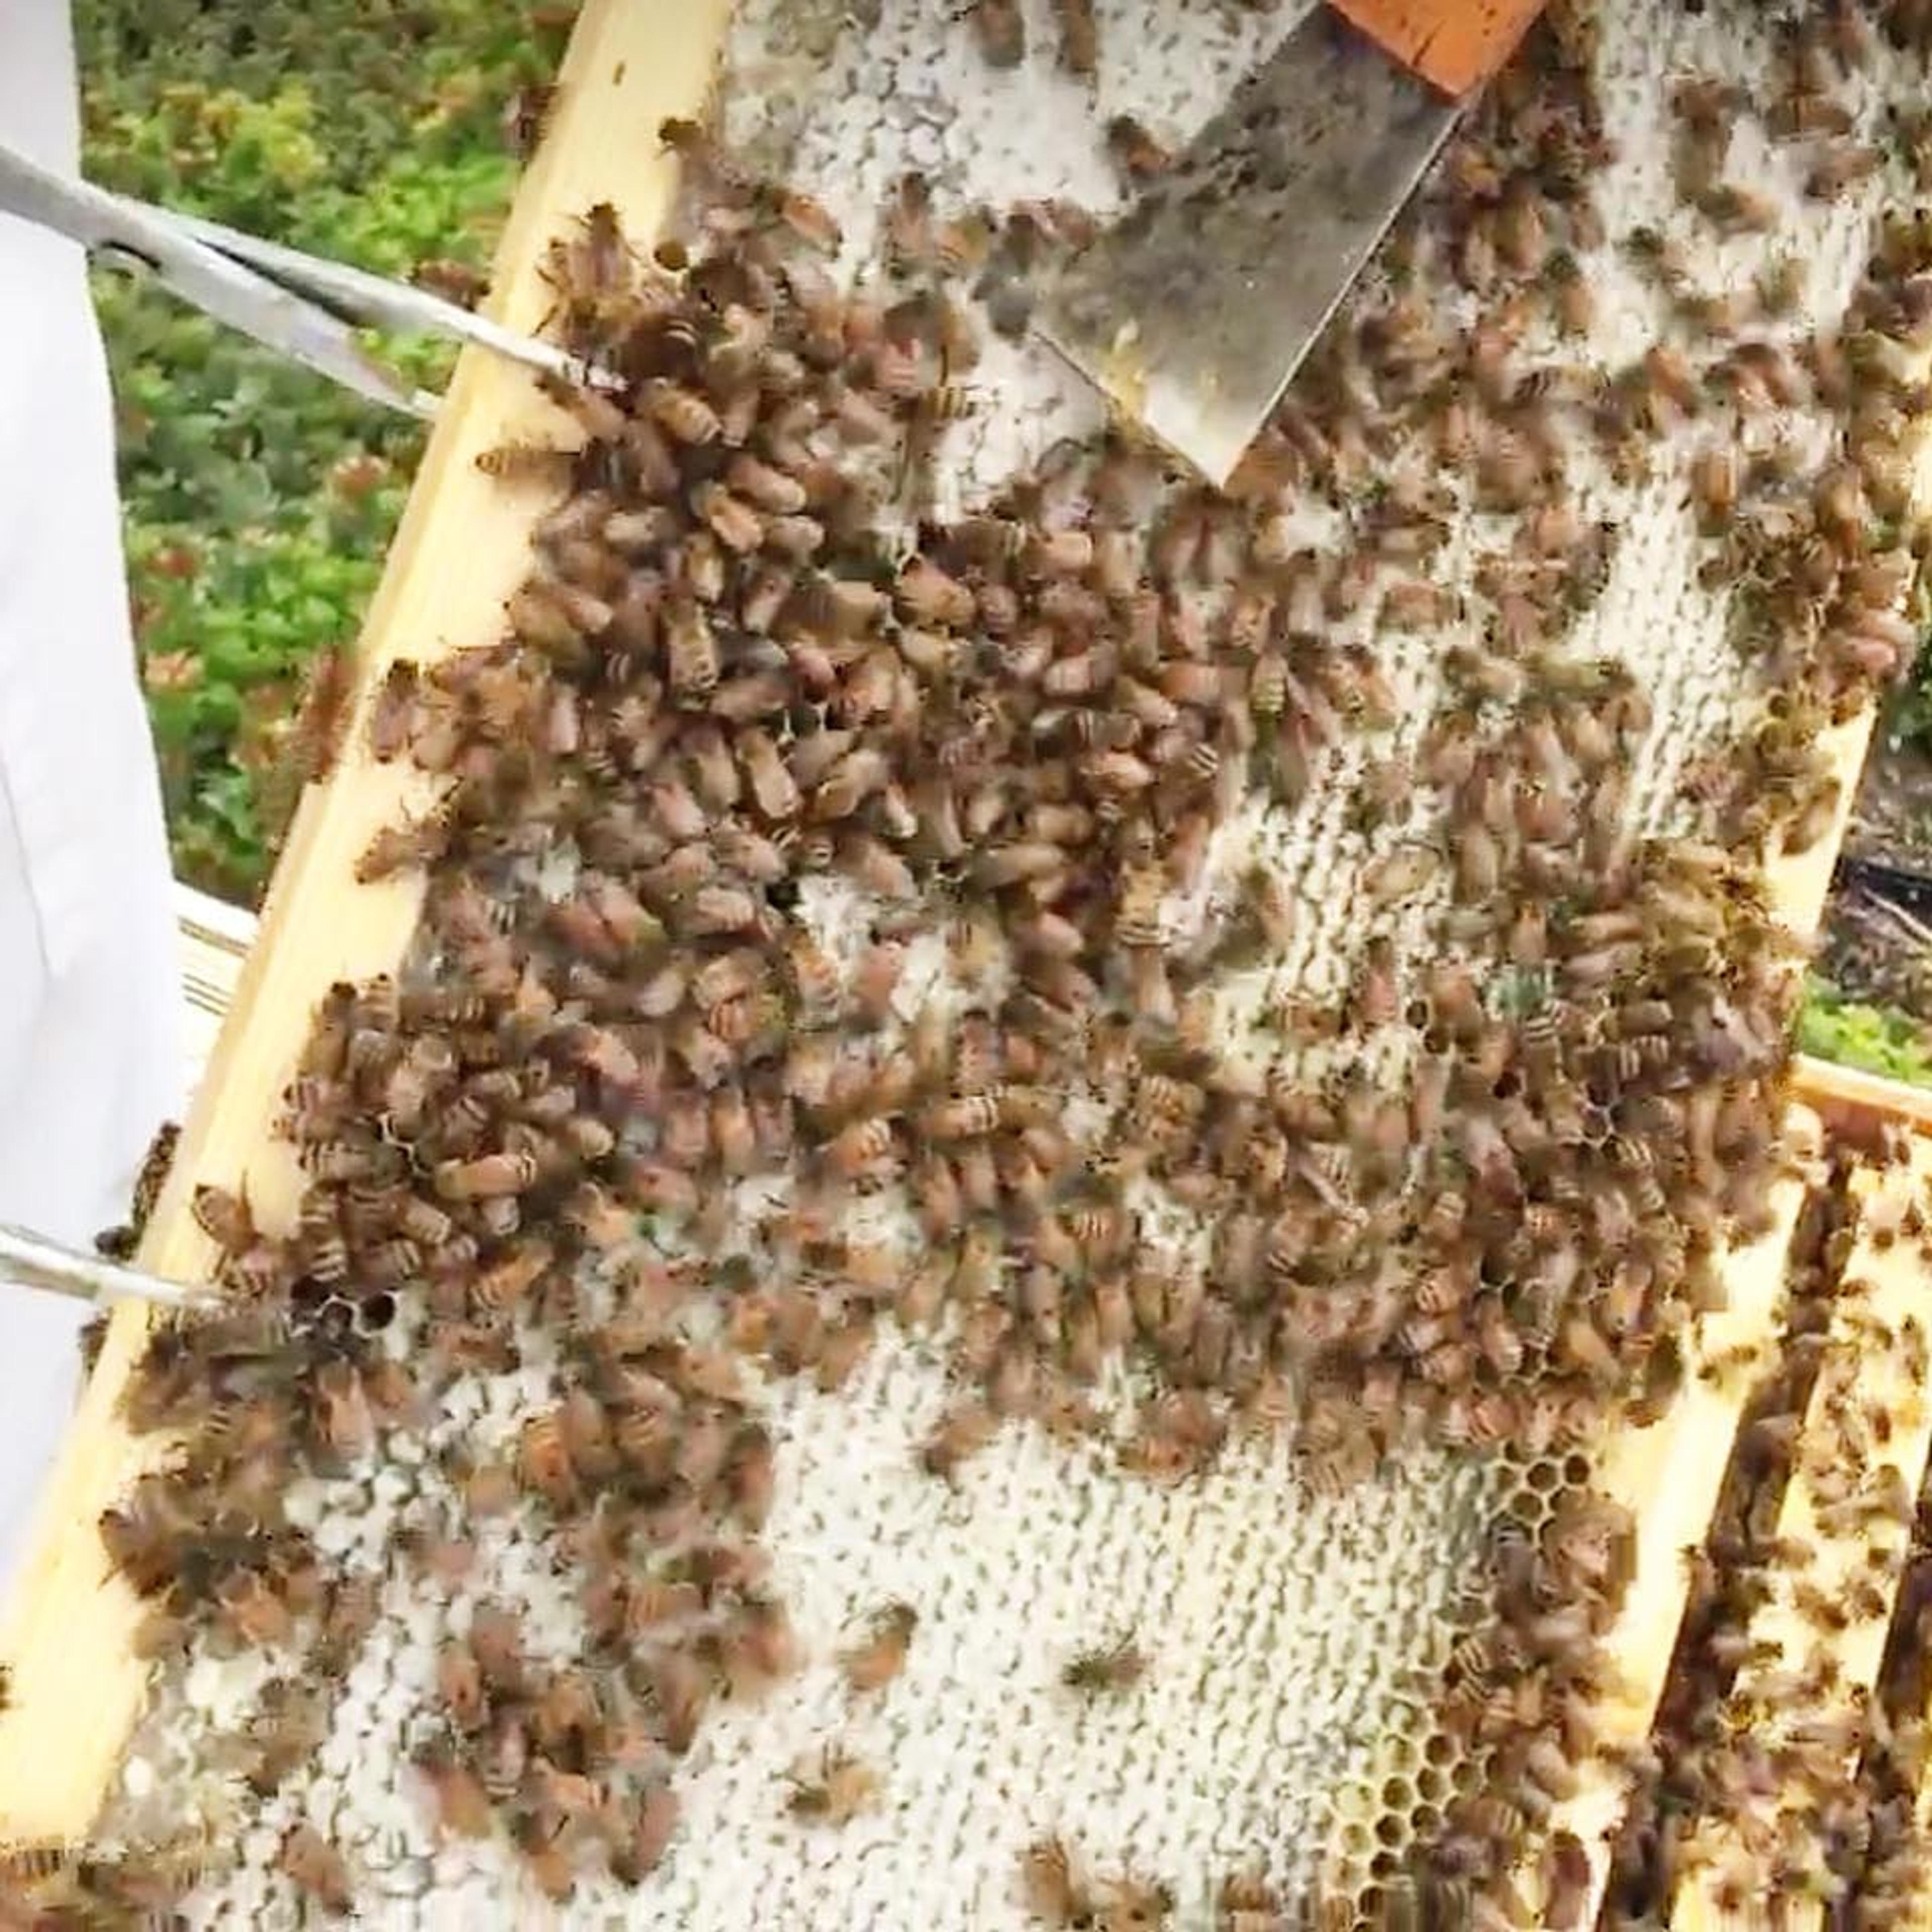 Close up image of bees